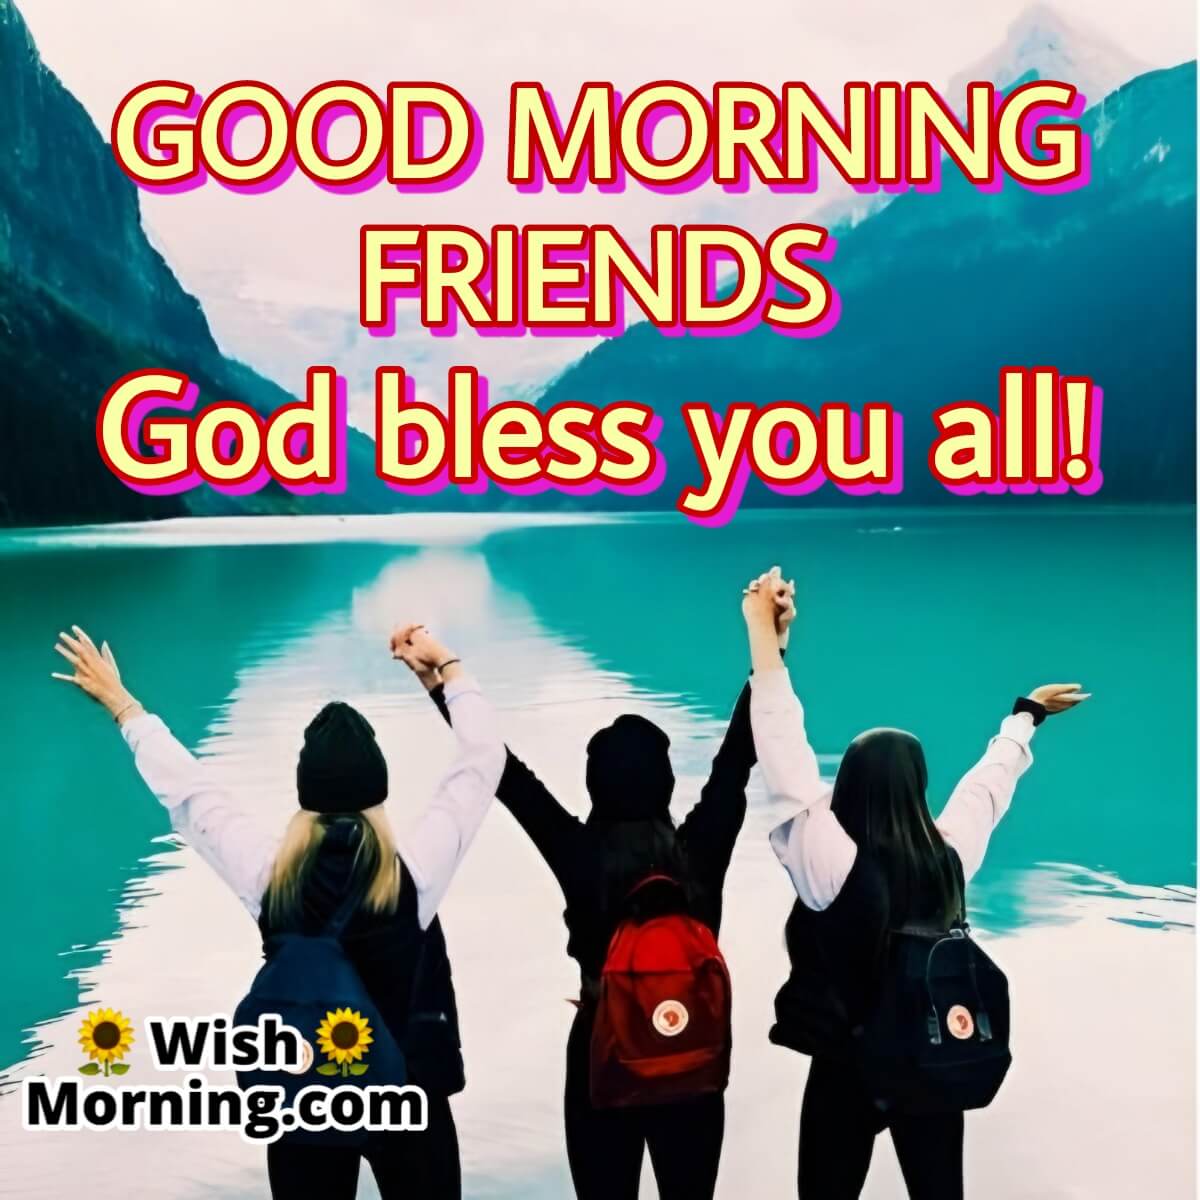 Good Morning Friends God Bless You All